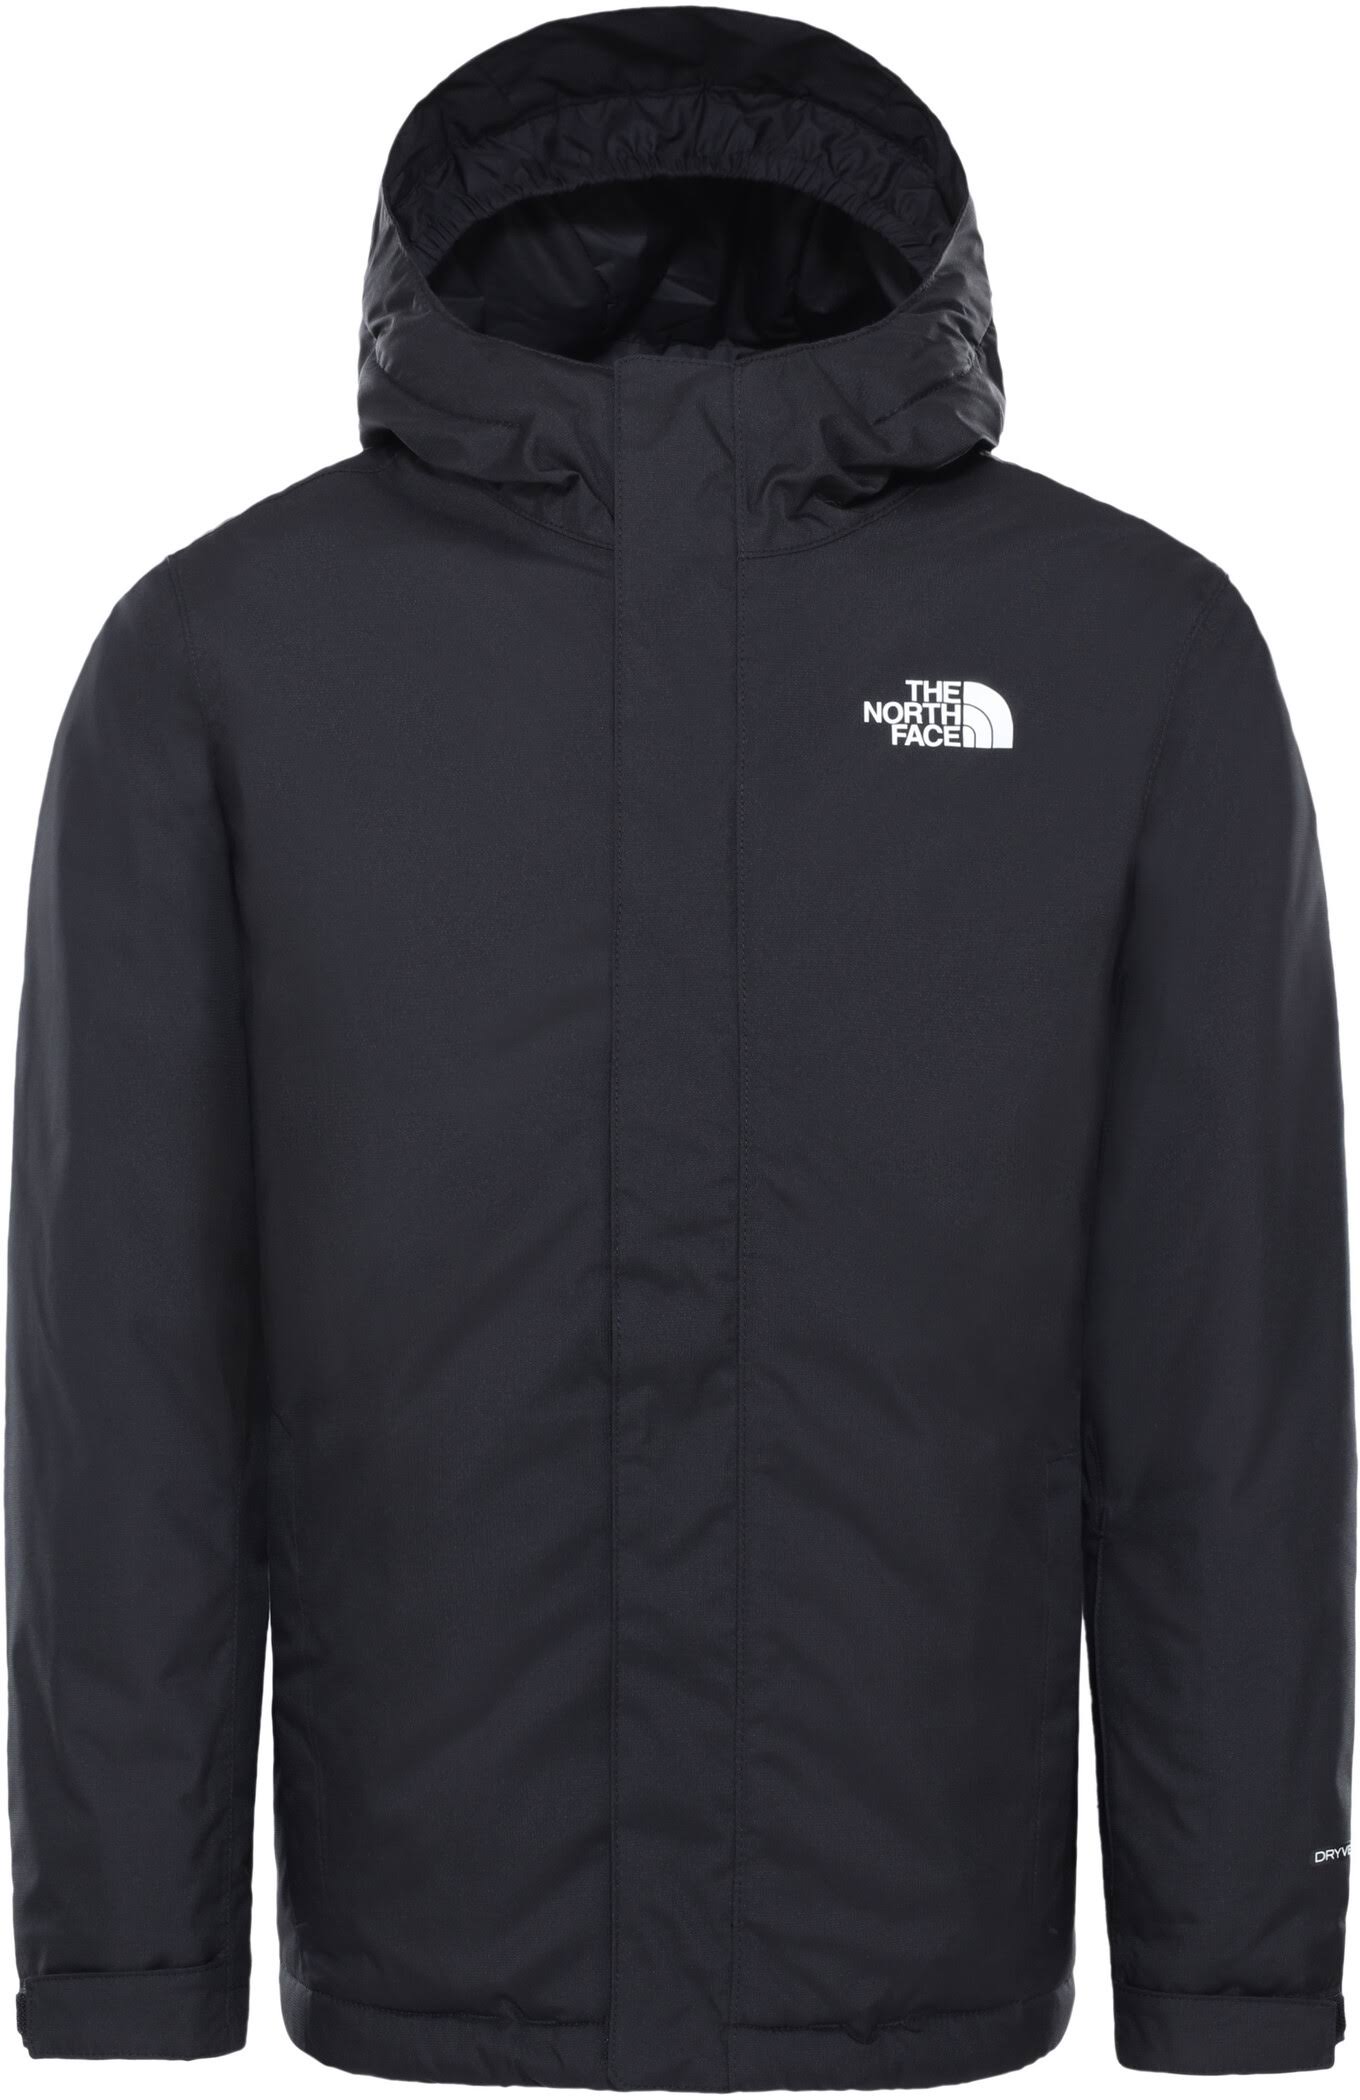 The North Face Youth Snowquest Jacket - TNF Black, X-Small